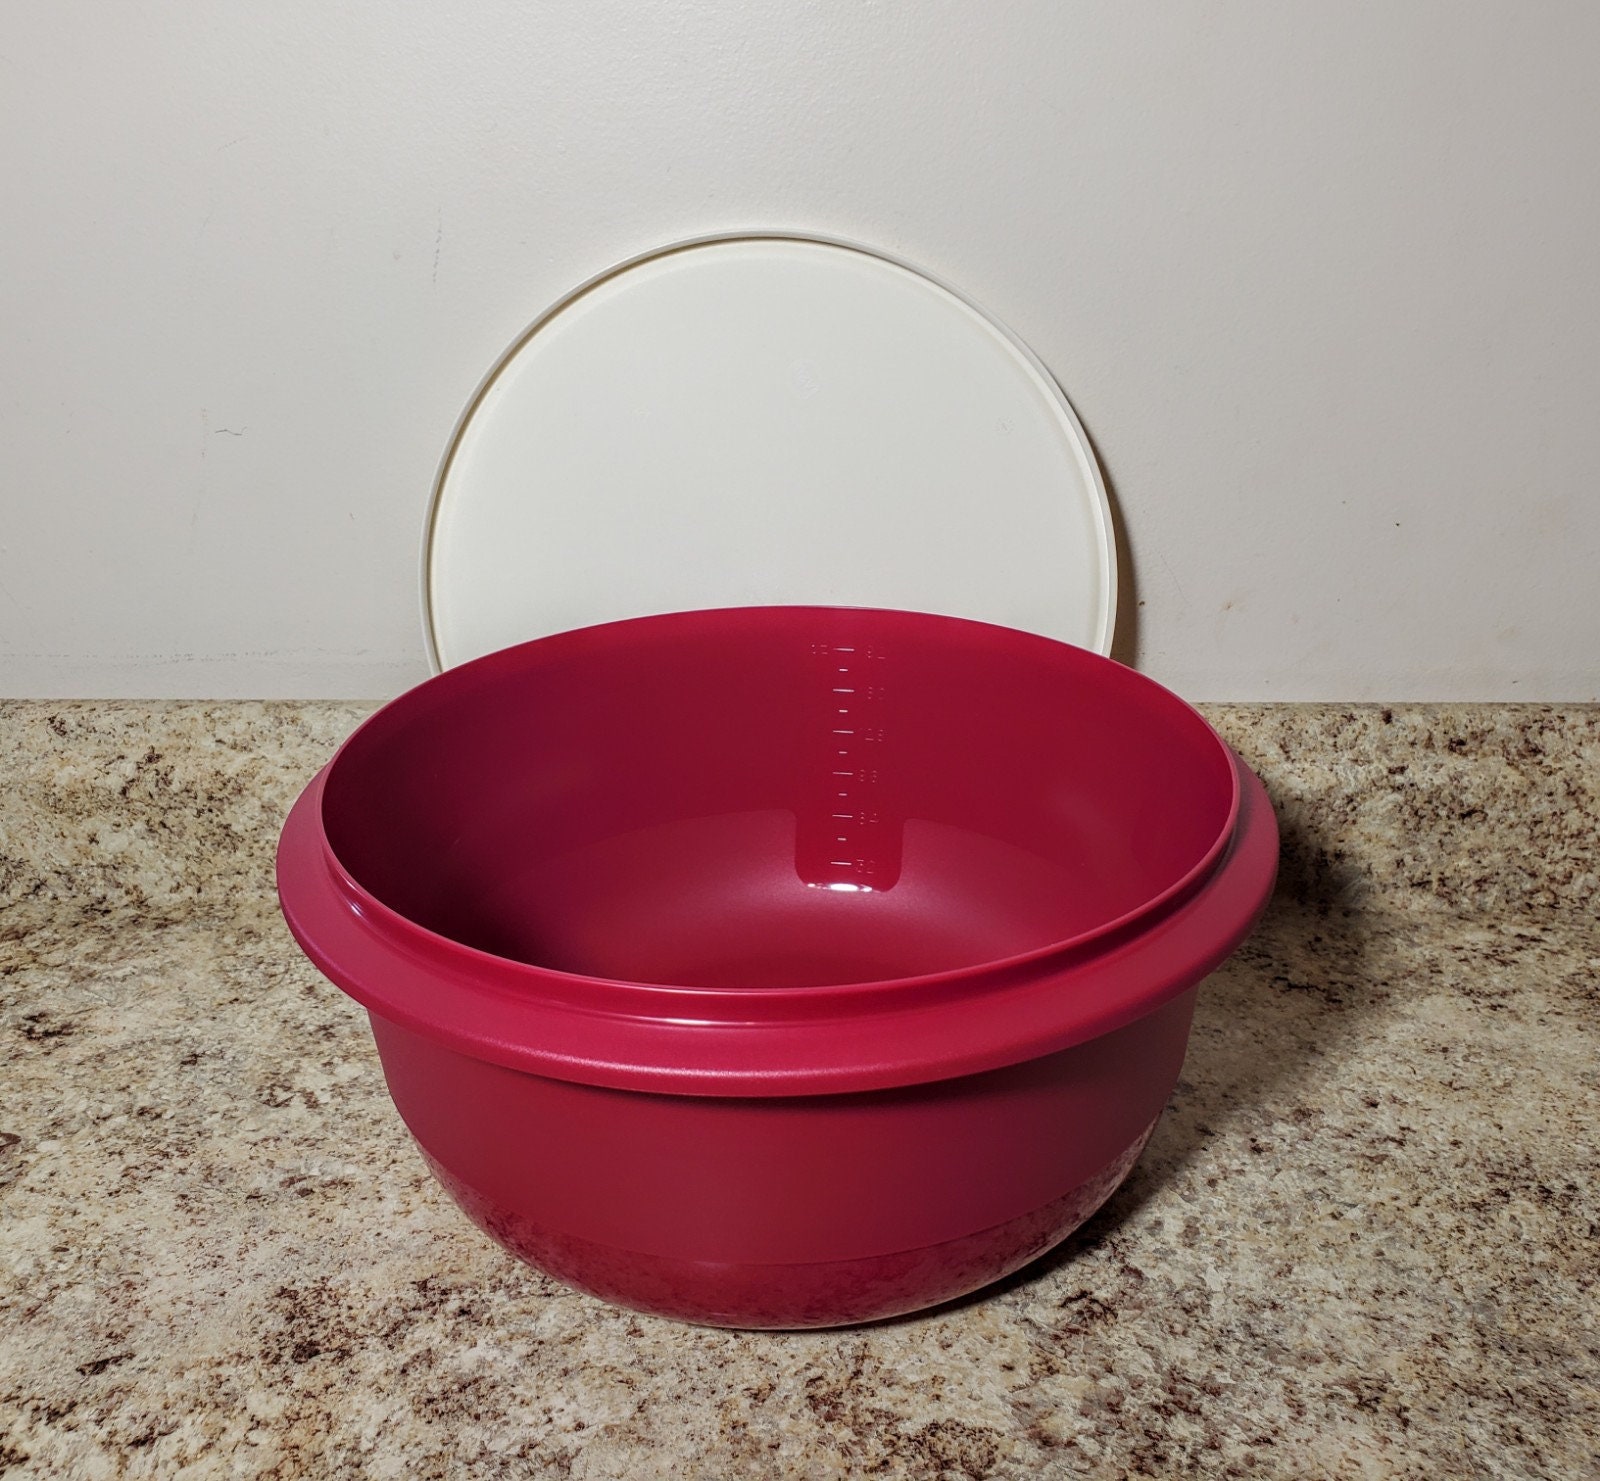 Tupperware Microwavable Bowls & Lids (Mix or Match)